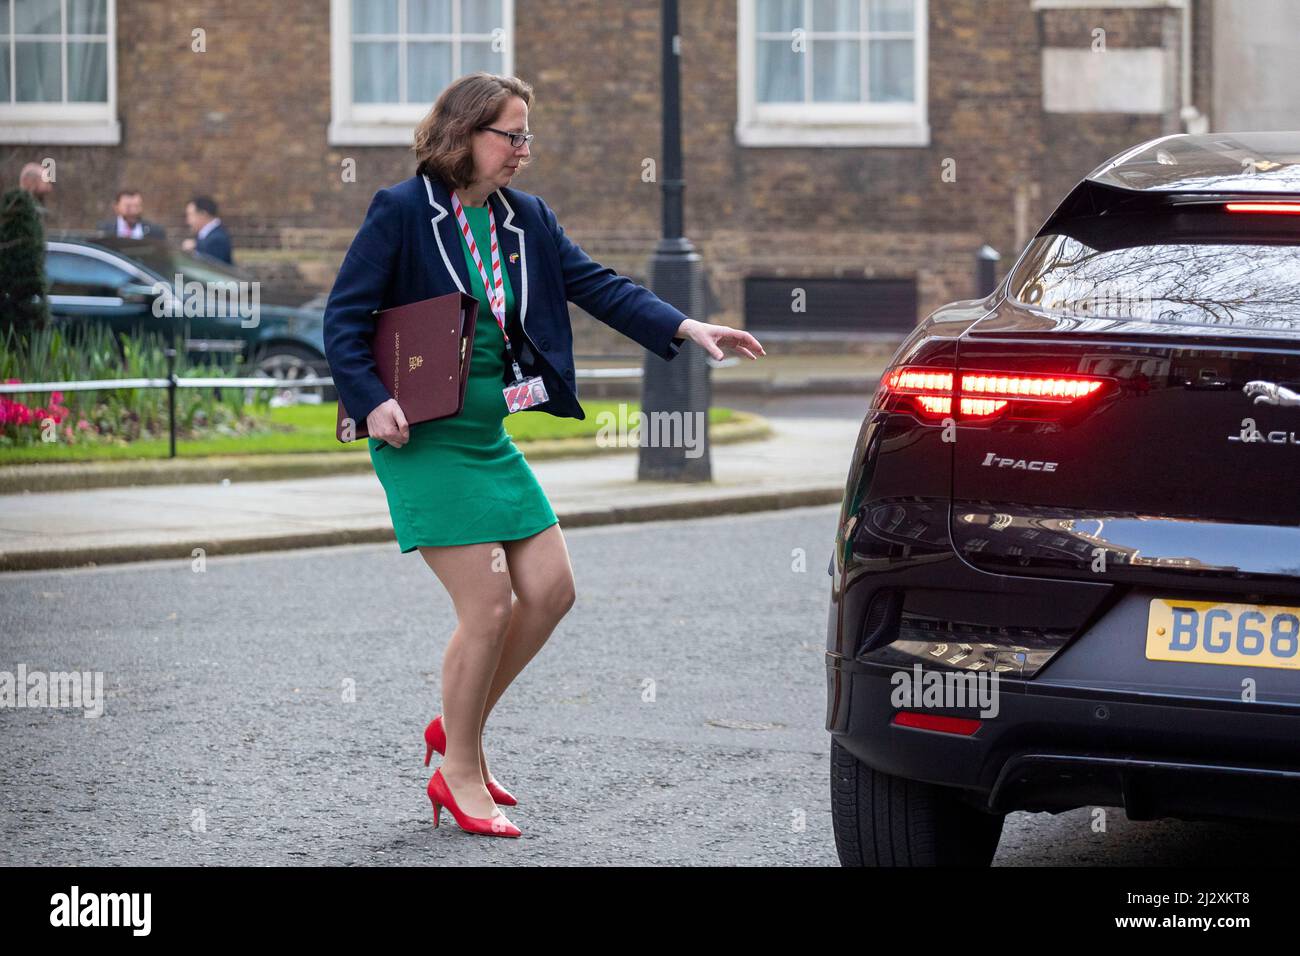 Baroness Evans of Bowes Park, Leader of the House of Lords, Lord Privy Seal, is seen at 10 Downing street ahead of weekly cabinet meetings. Stock Photo